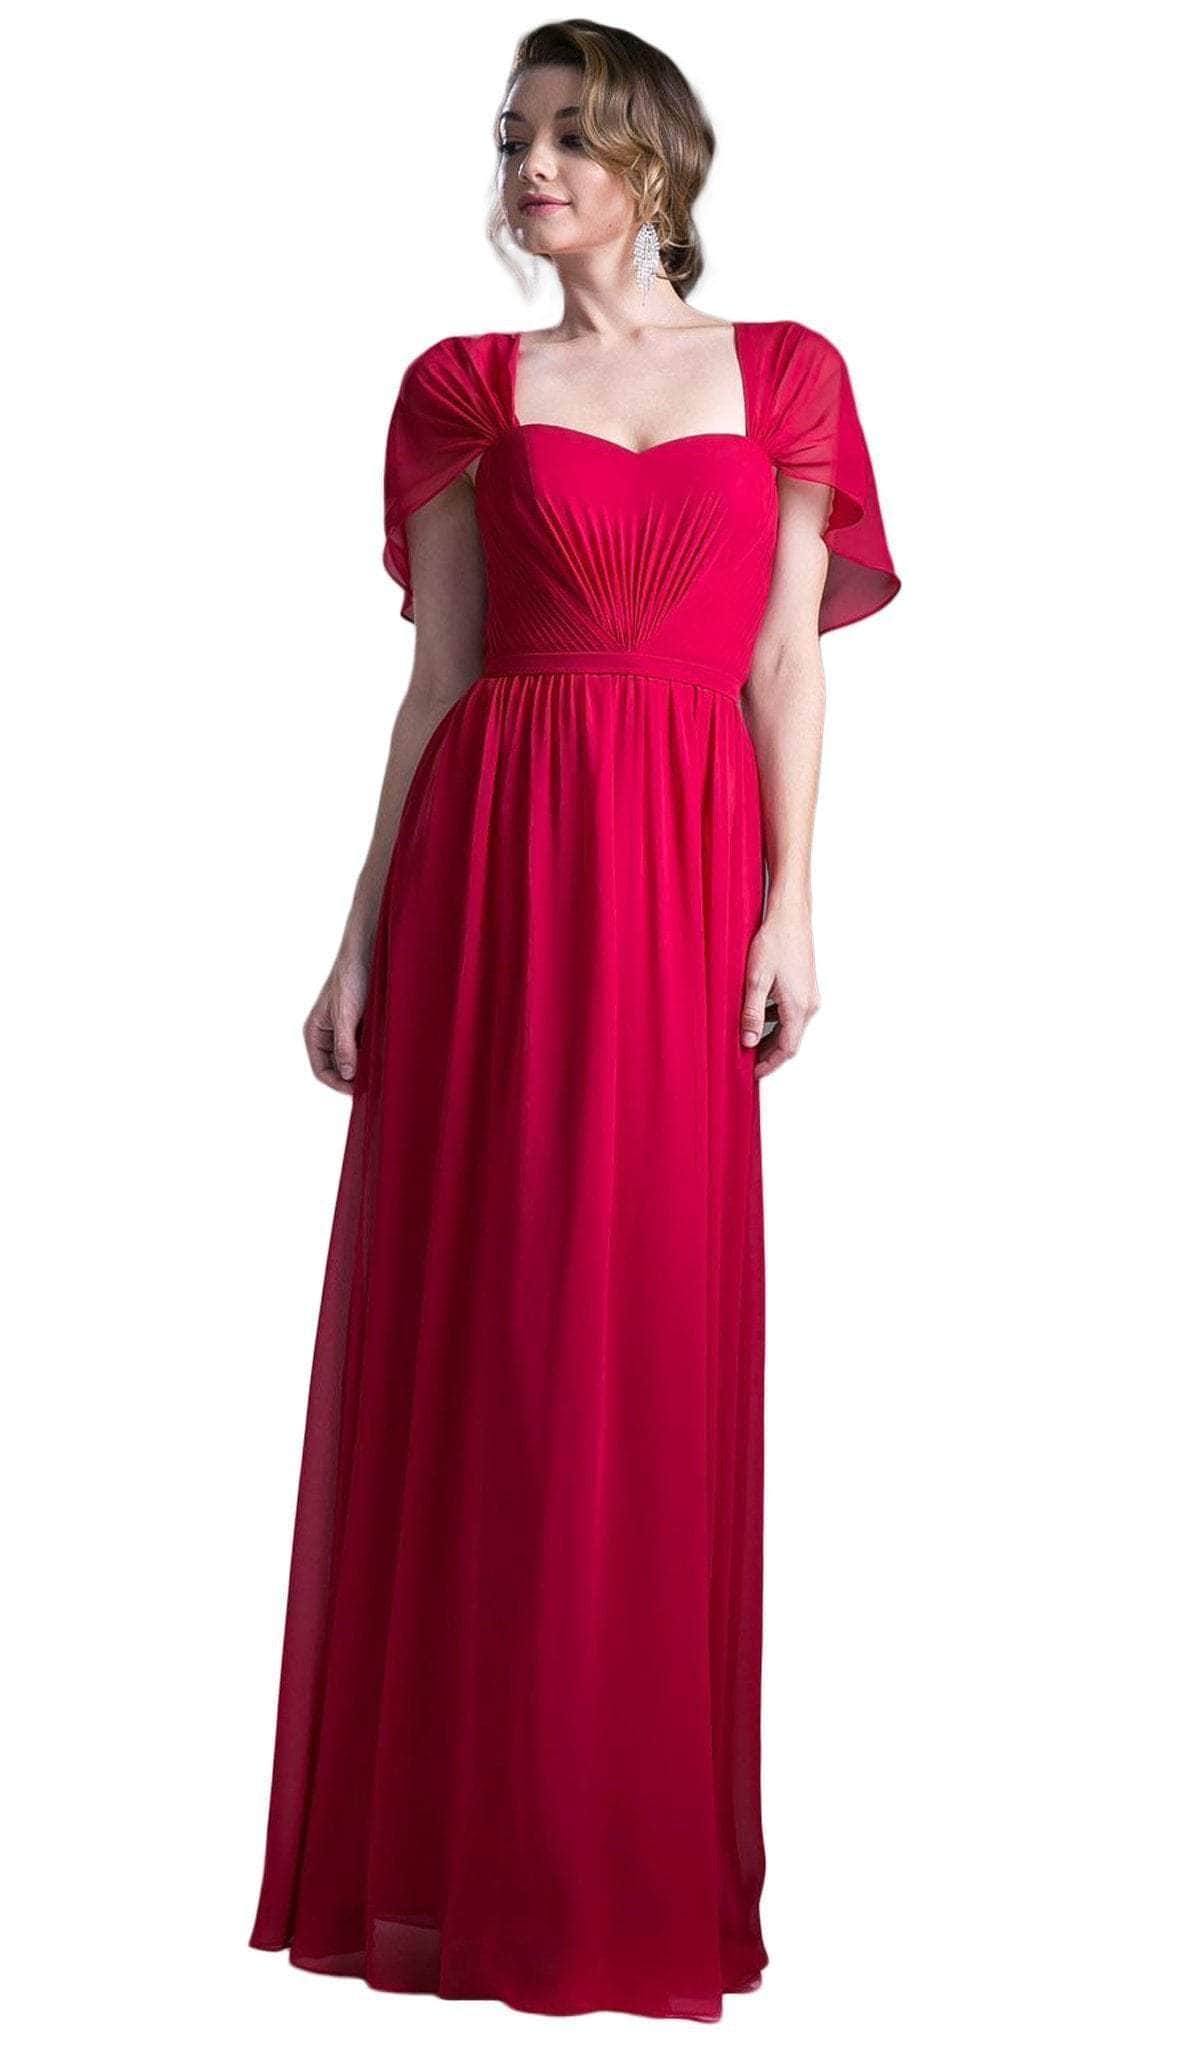 Ladivine CH532 - Semi-Sweetheart Dress With Cape Detail
